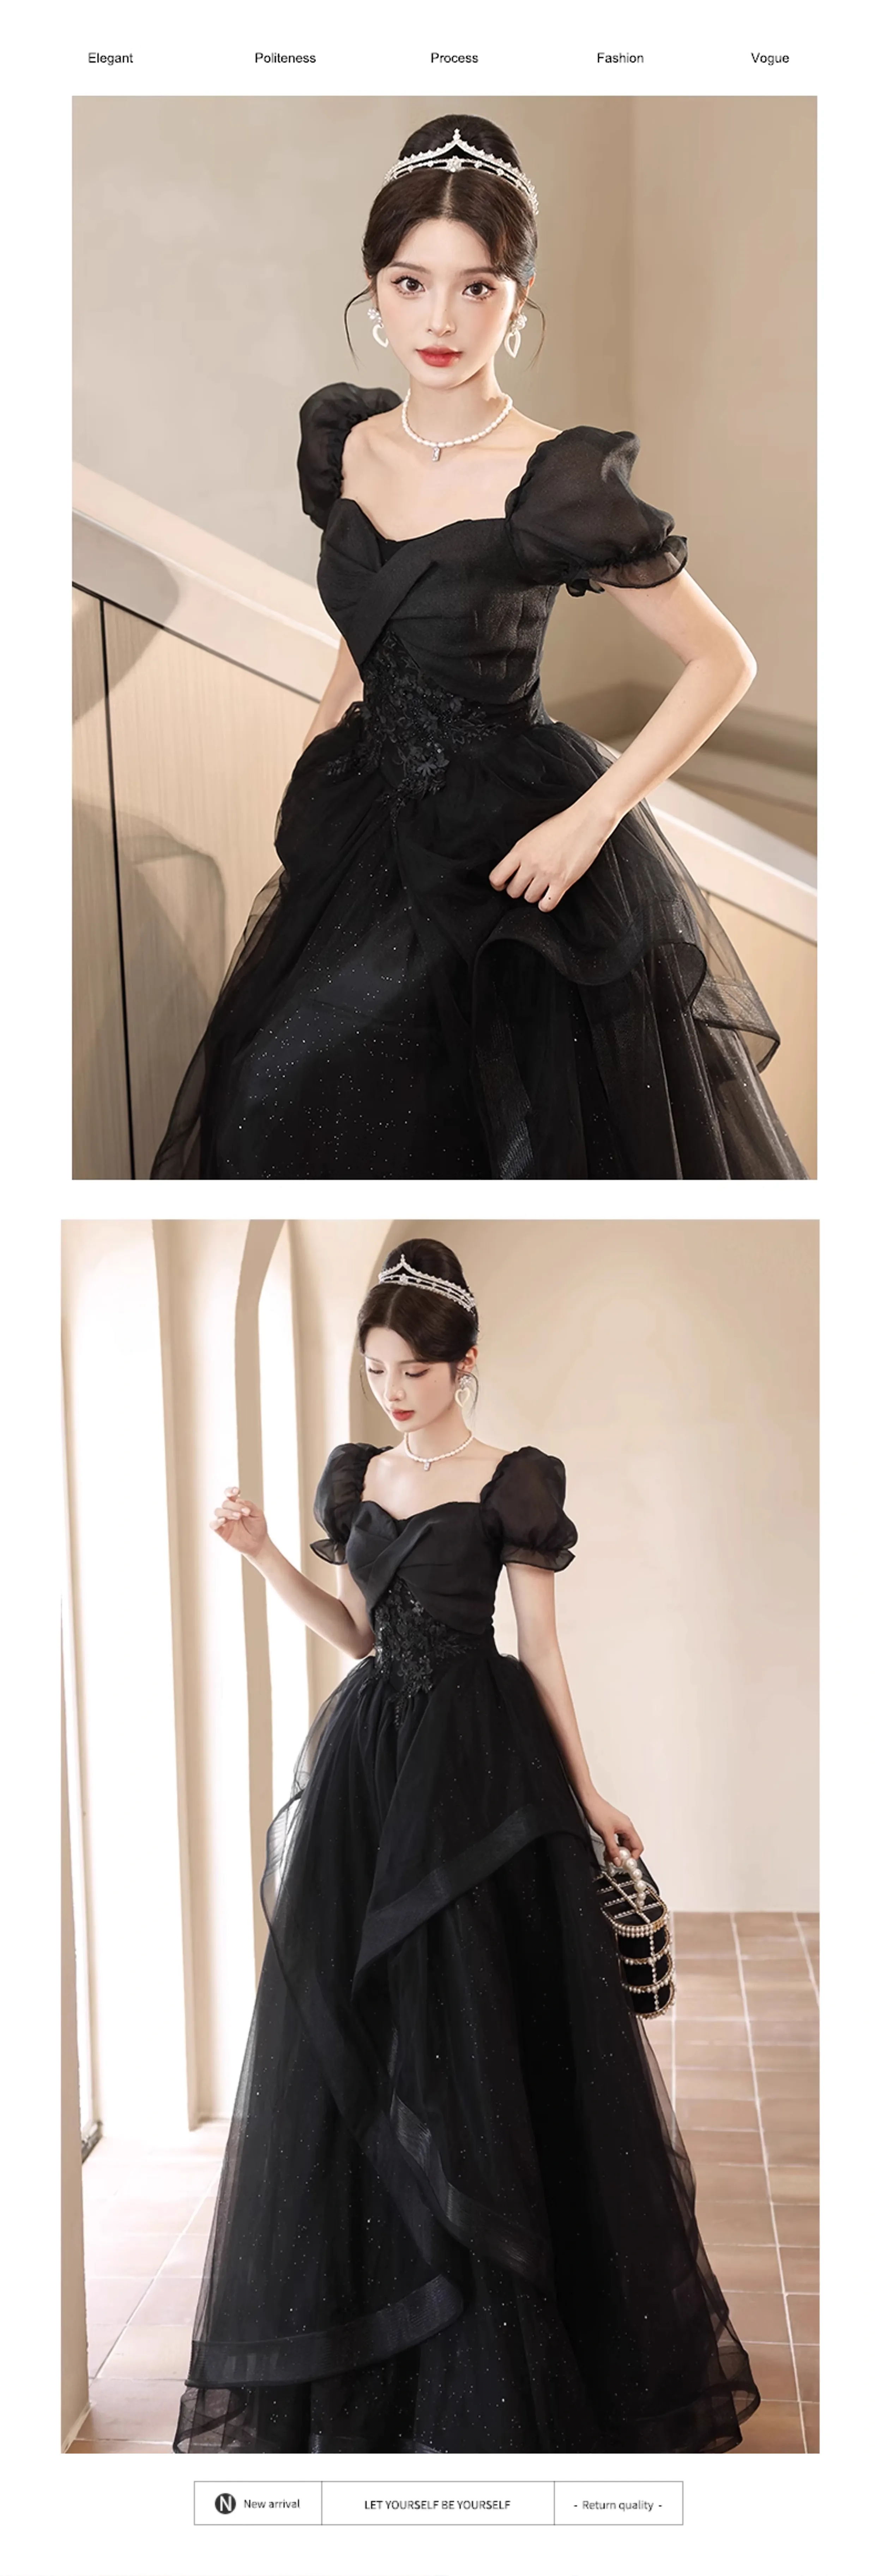 Black-Chiffon-Birthday-Party-Prom-Dress-Cocktail-Evening-Ball-Gown12